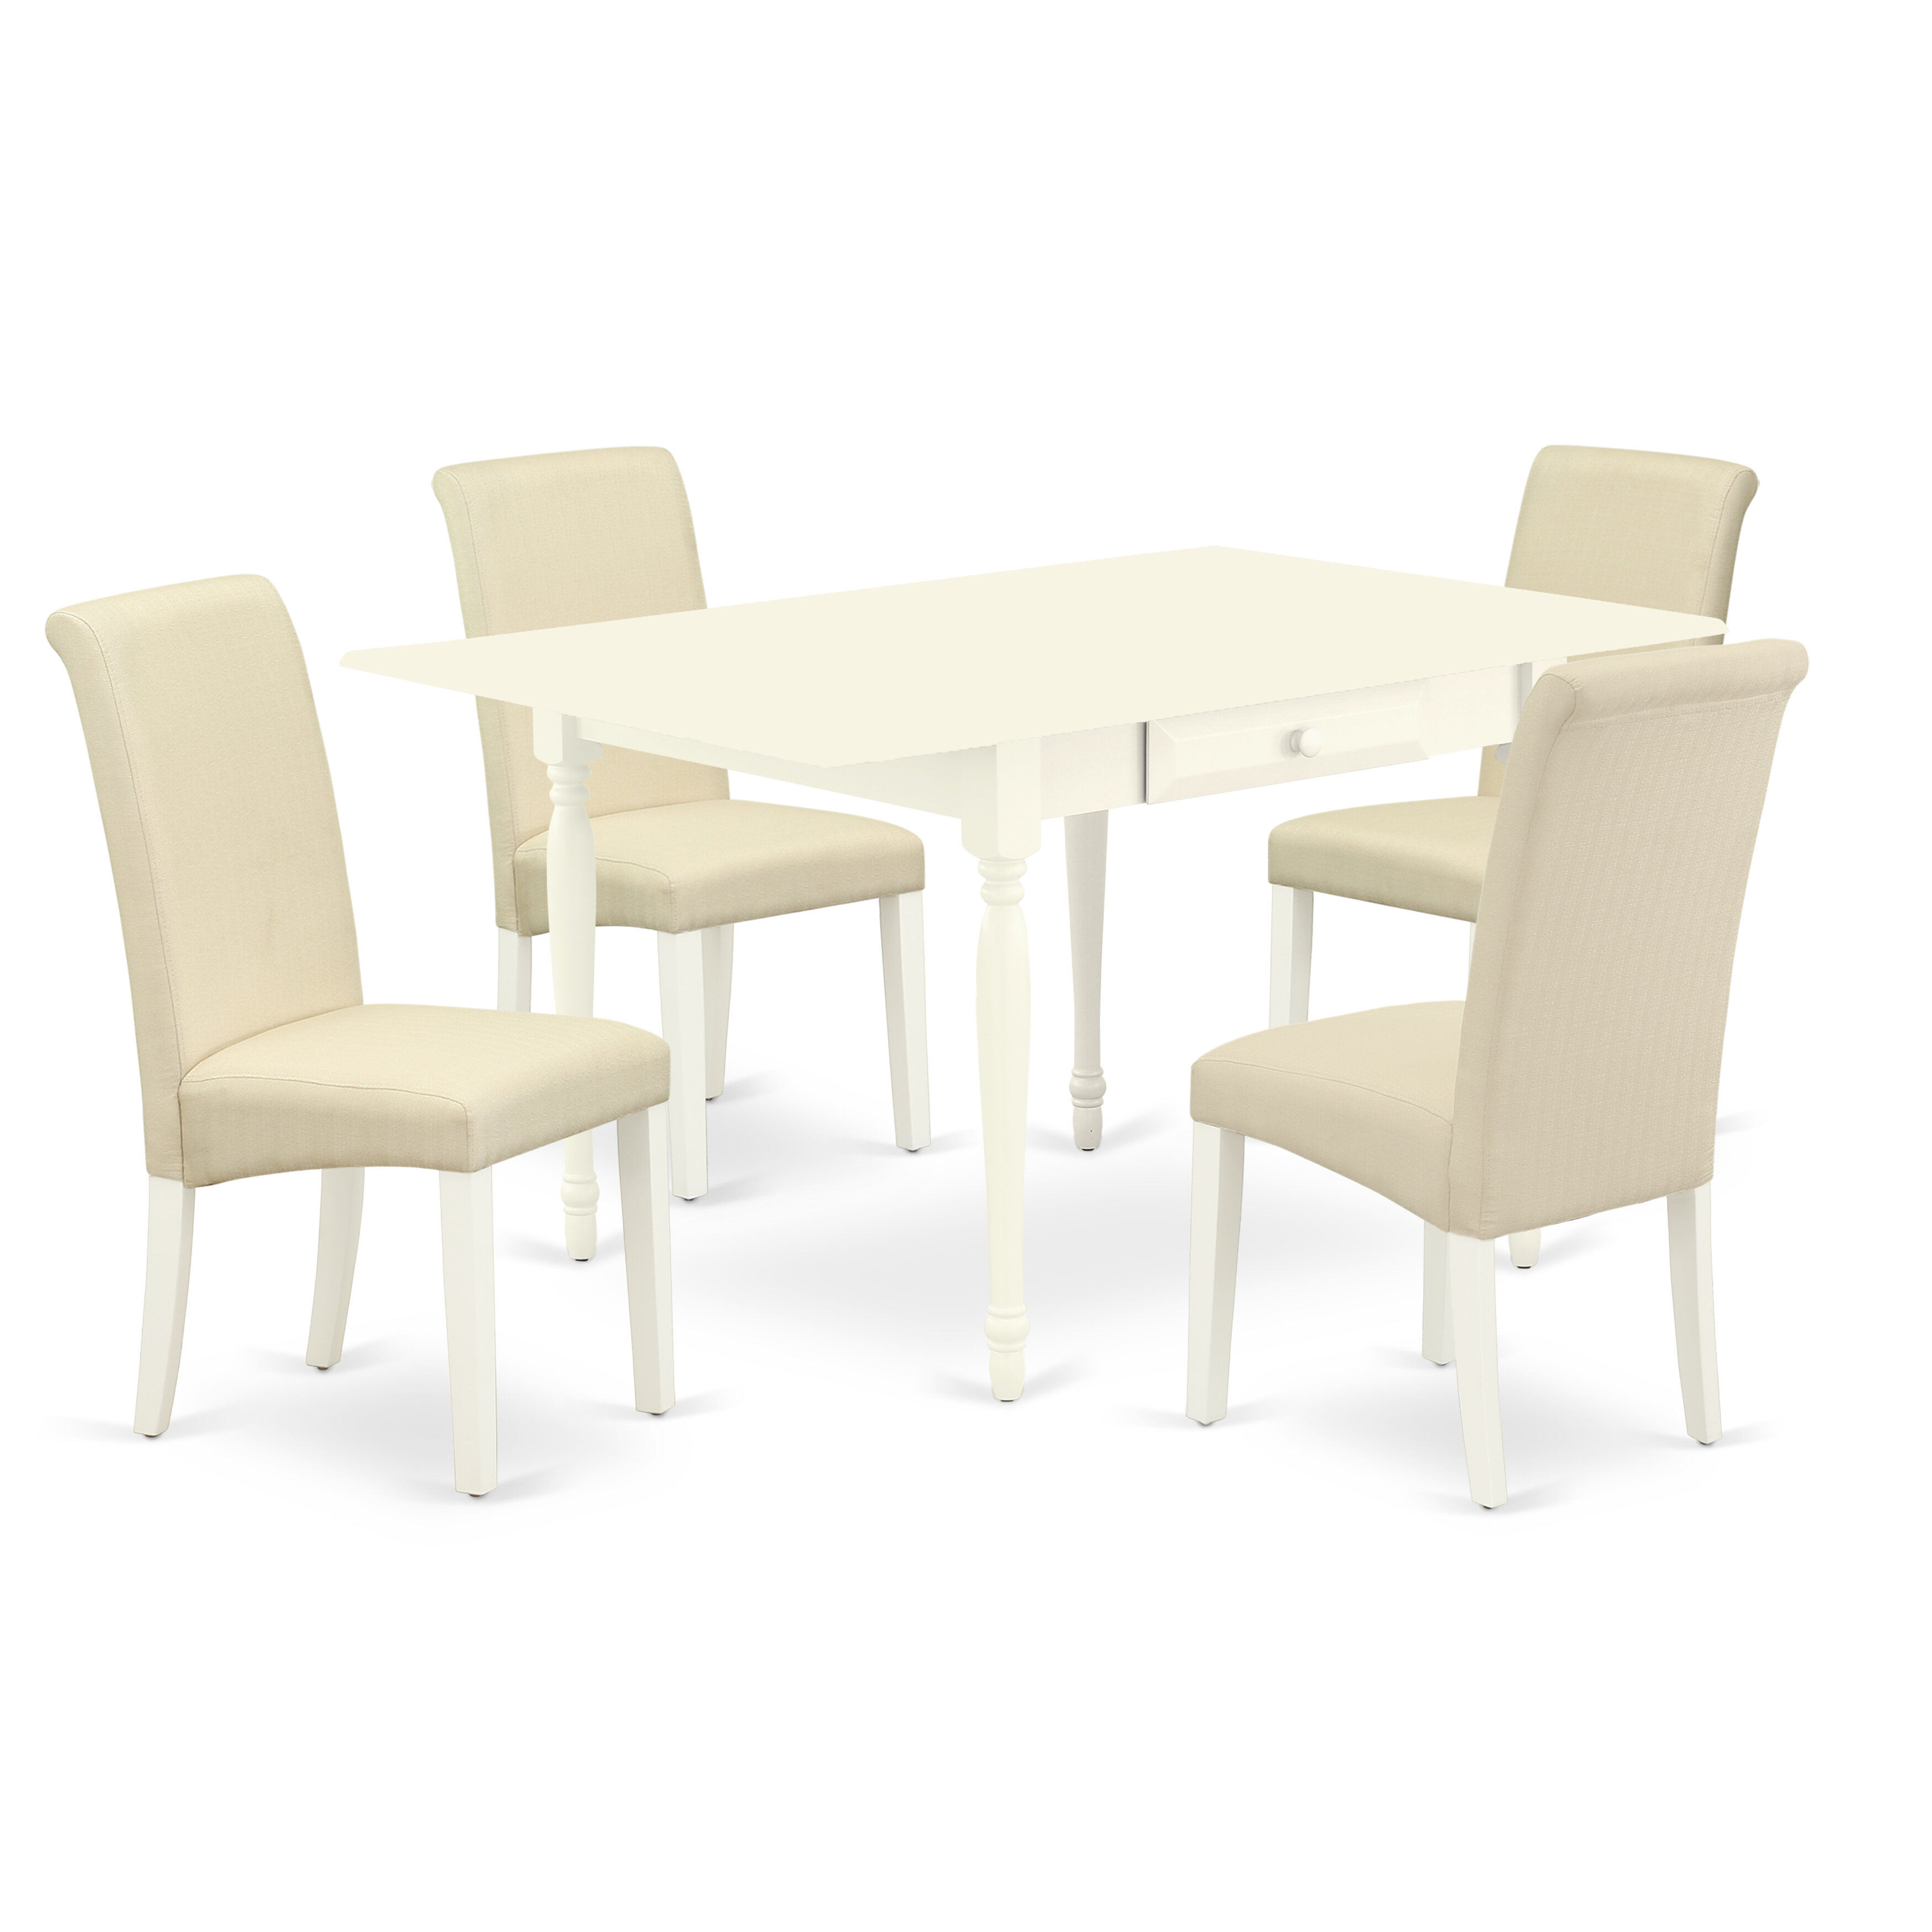 Ophelia Co 3pc Dining Table Set Consists Of A Dinette Table And 2 Parson Dining Chairs With Cream Colour Linen Fabric Drop Leaf Table With Full Back Chairs Wayfair Ca